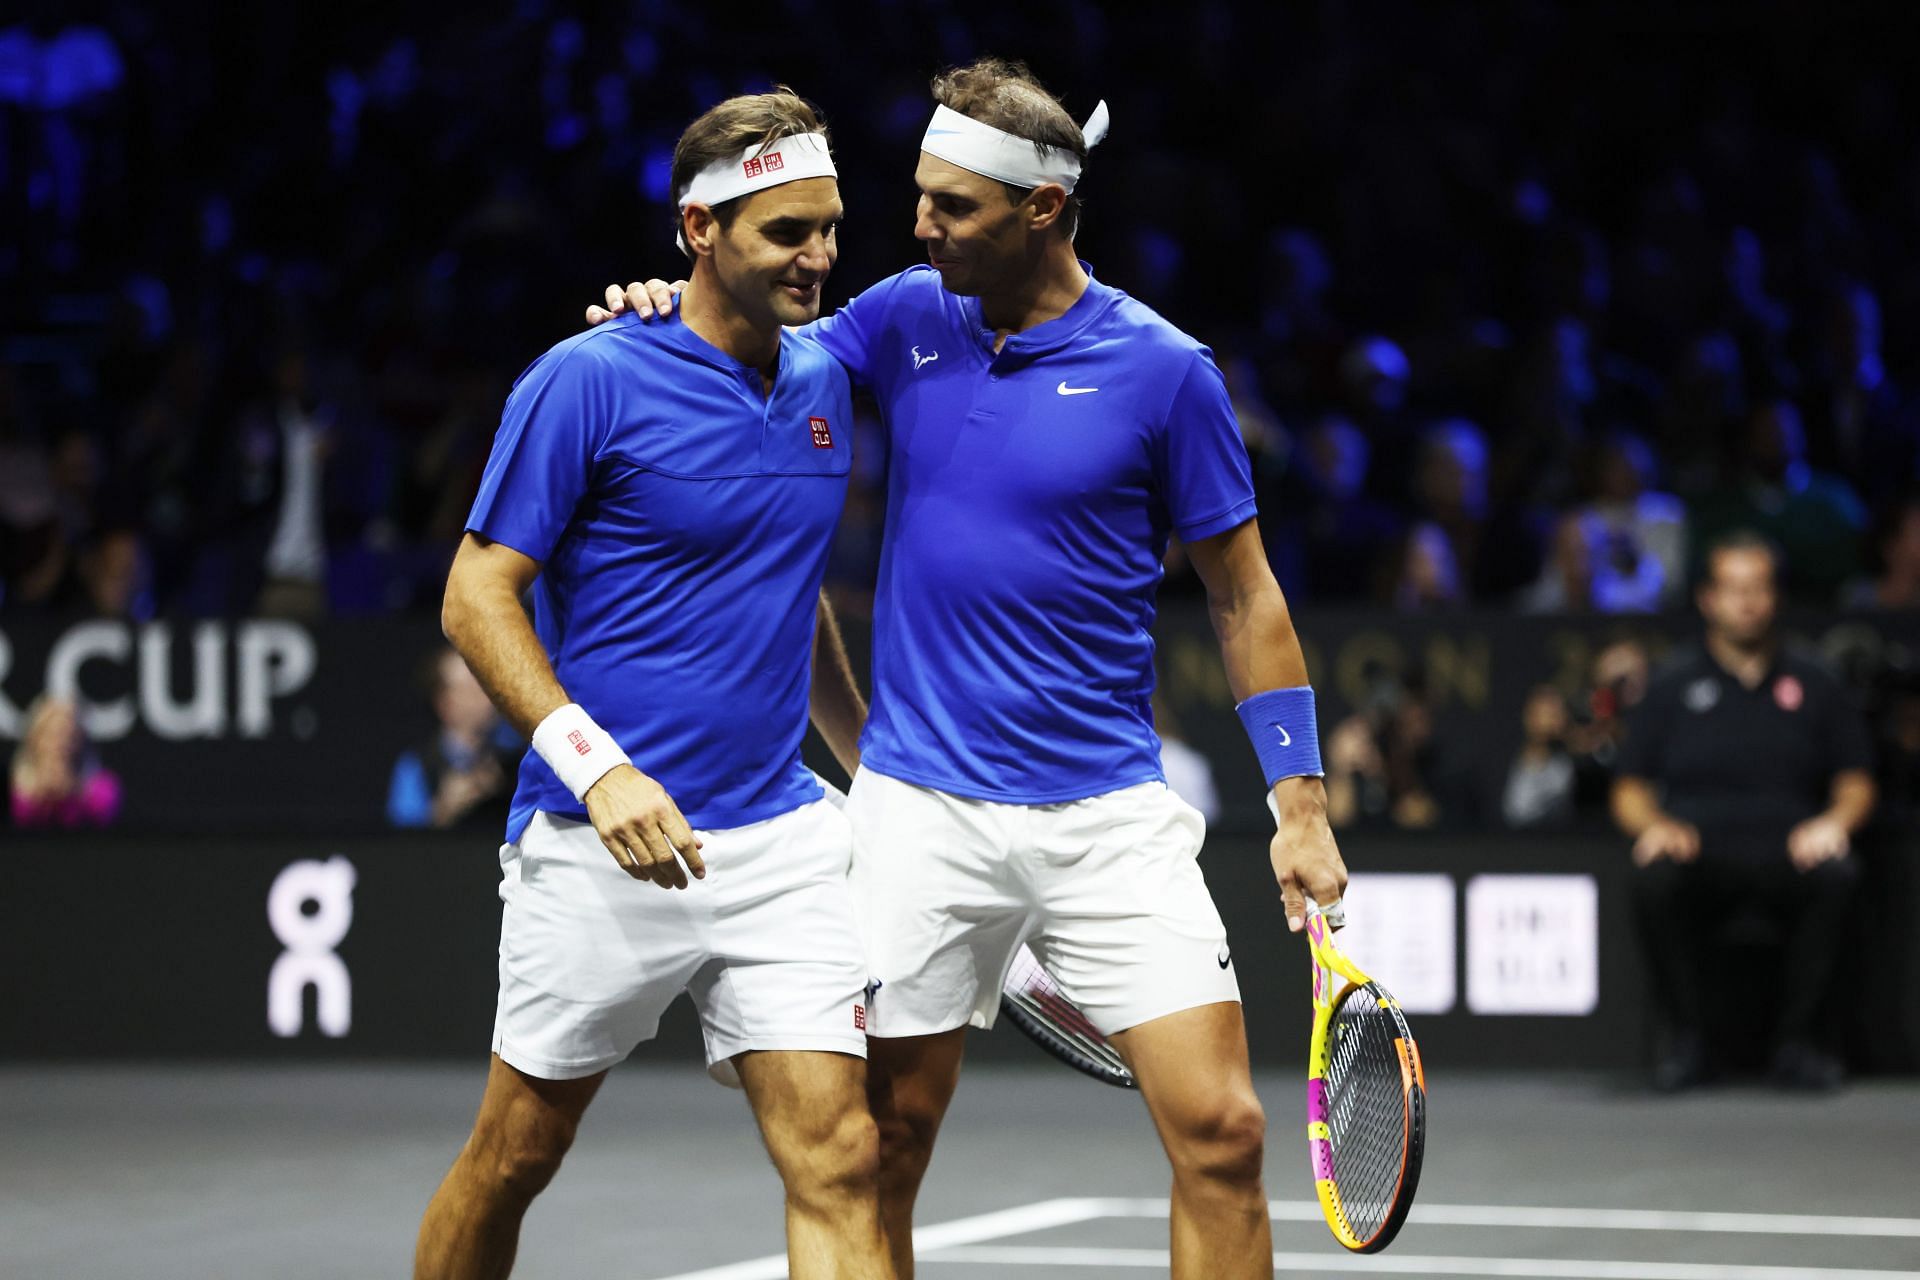 Rafael Nadal and Roger Federer reveal how they want to be remembered during heart-warming conversation